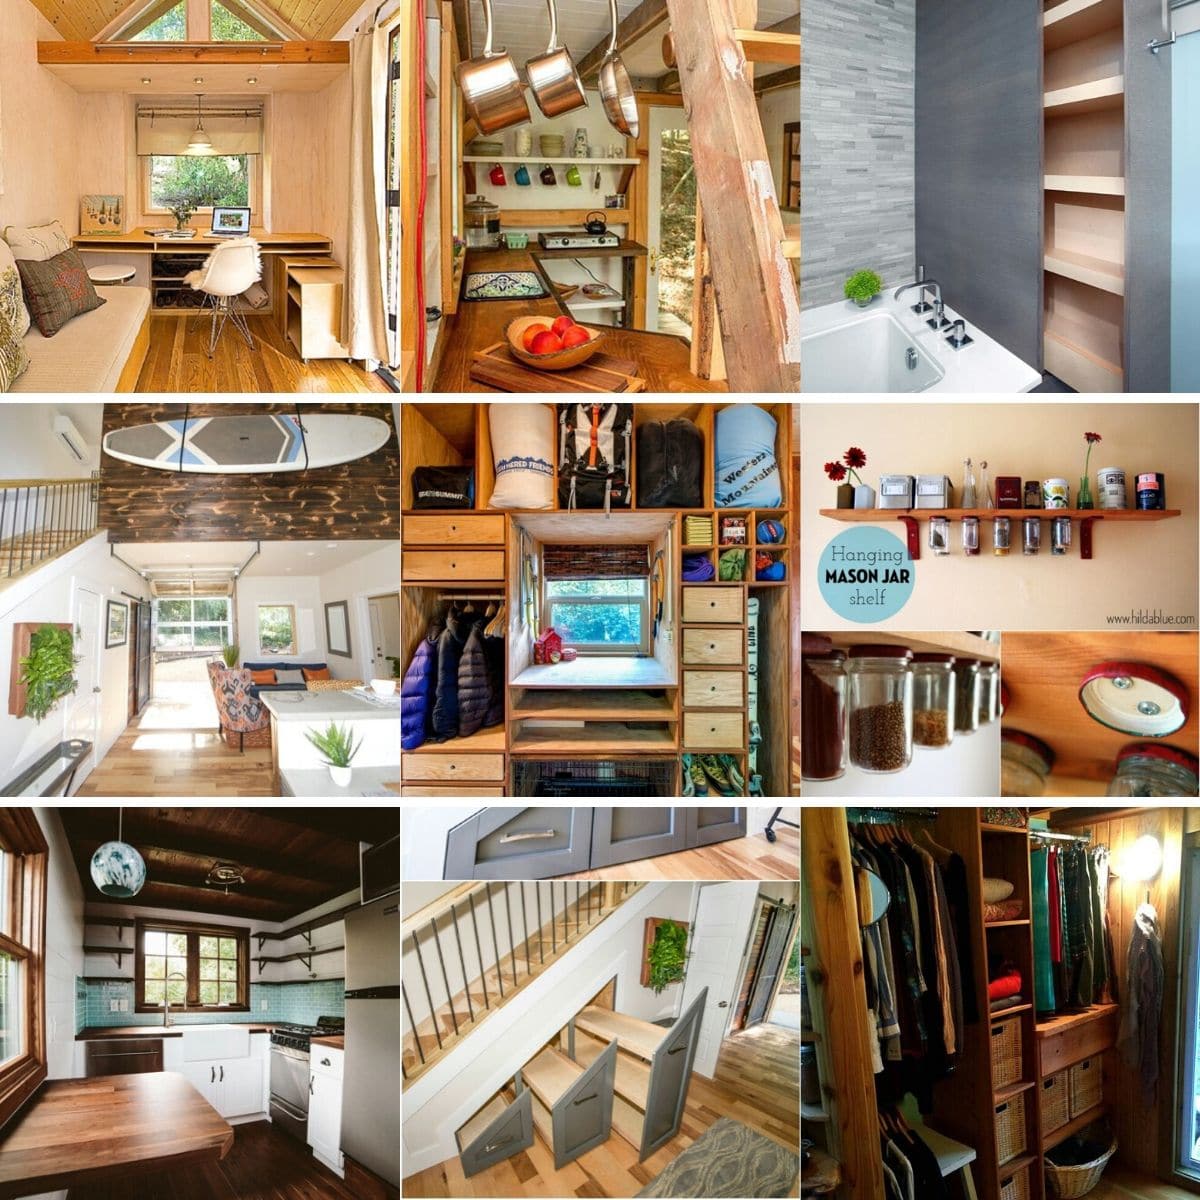 40 Tiny House Storage and Organizing Ideas for the Entire Home